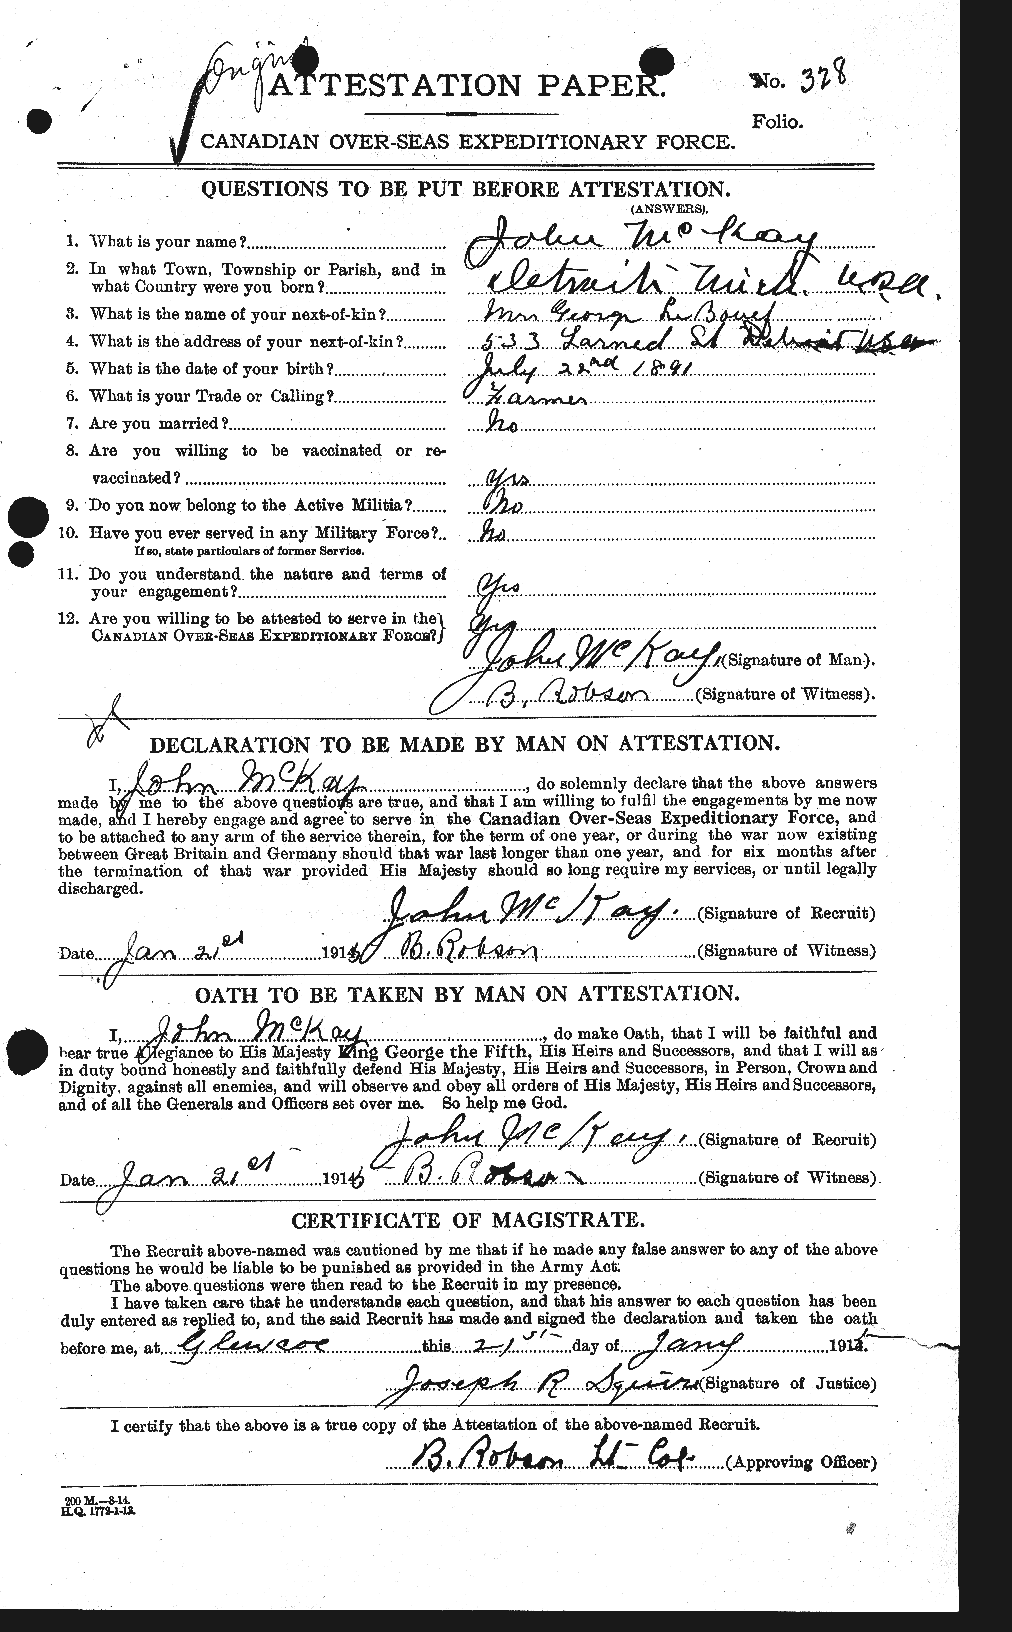 Personnel Records of the First World War - CEF 526959a